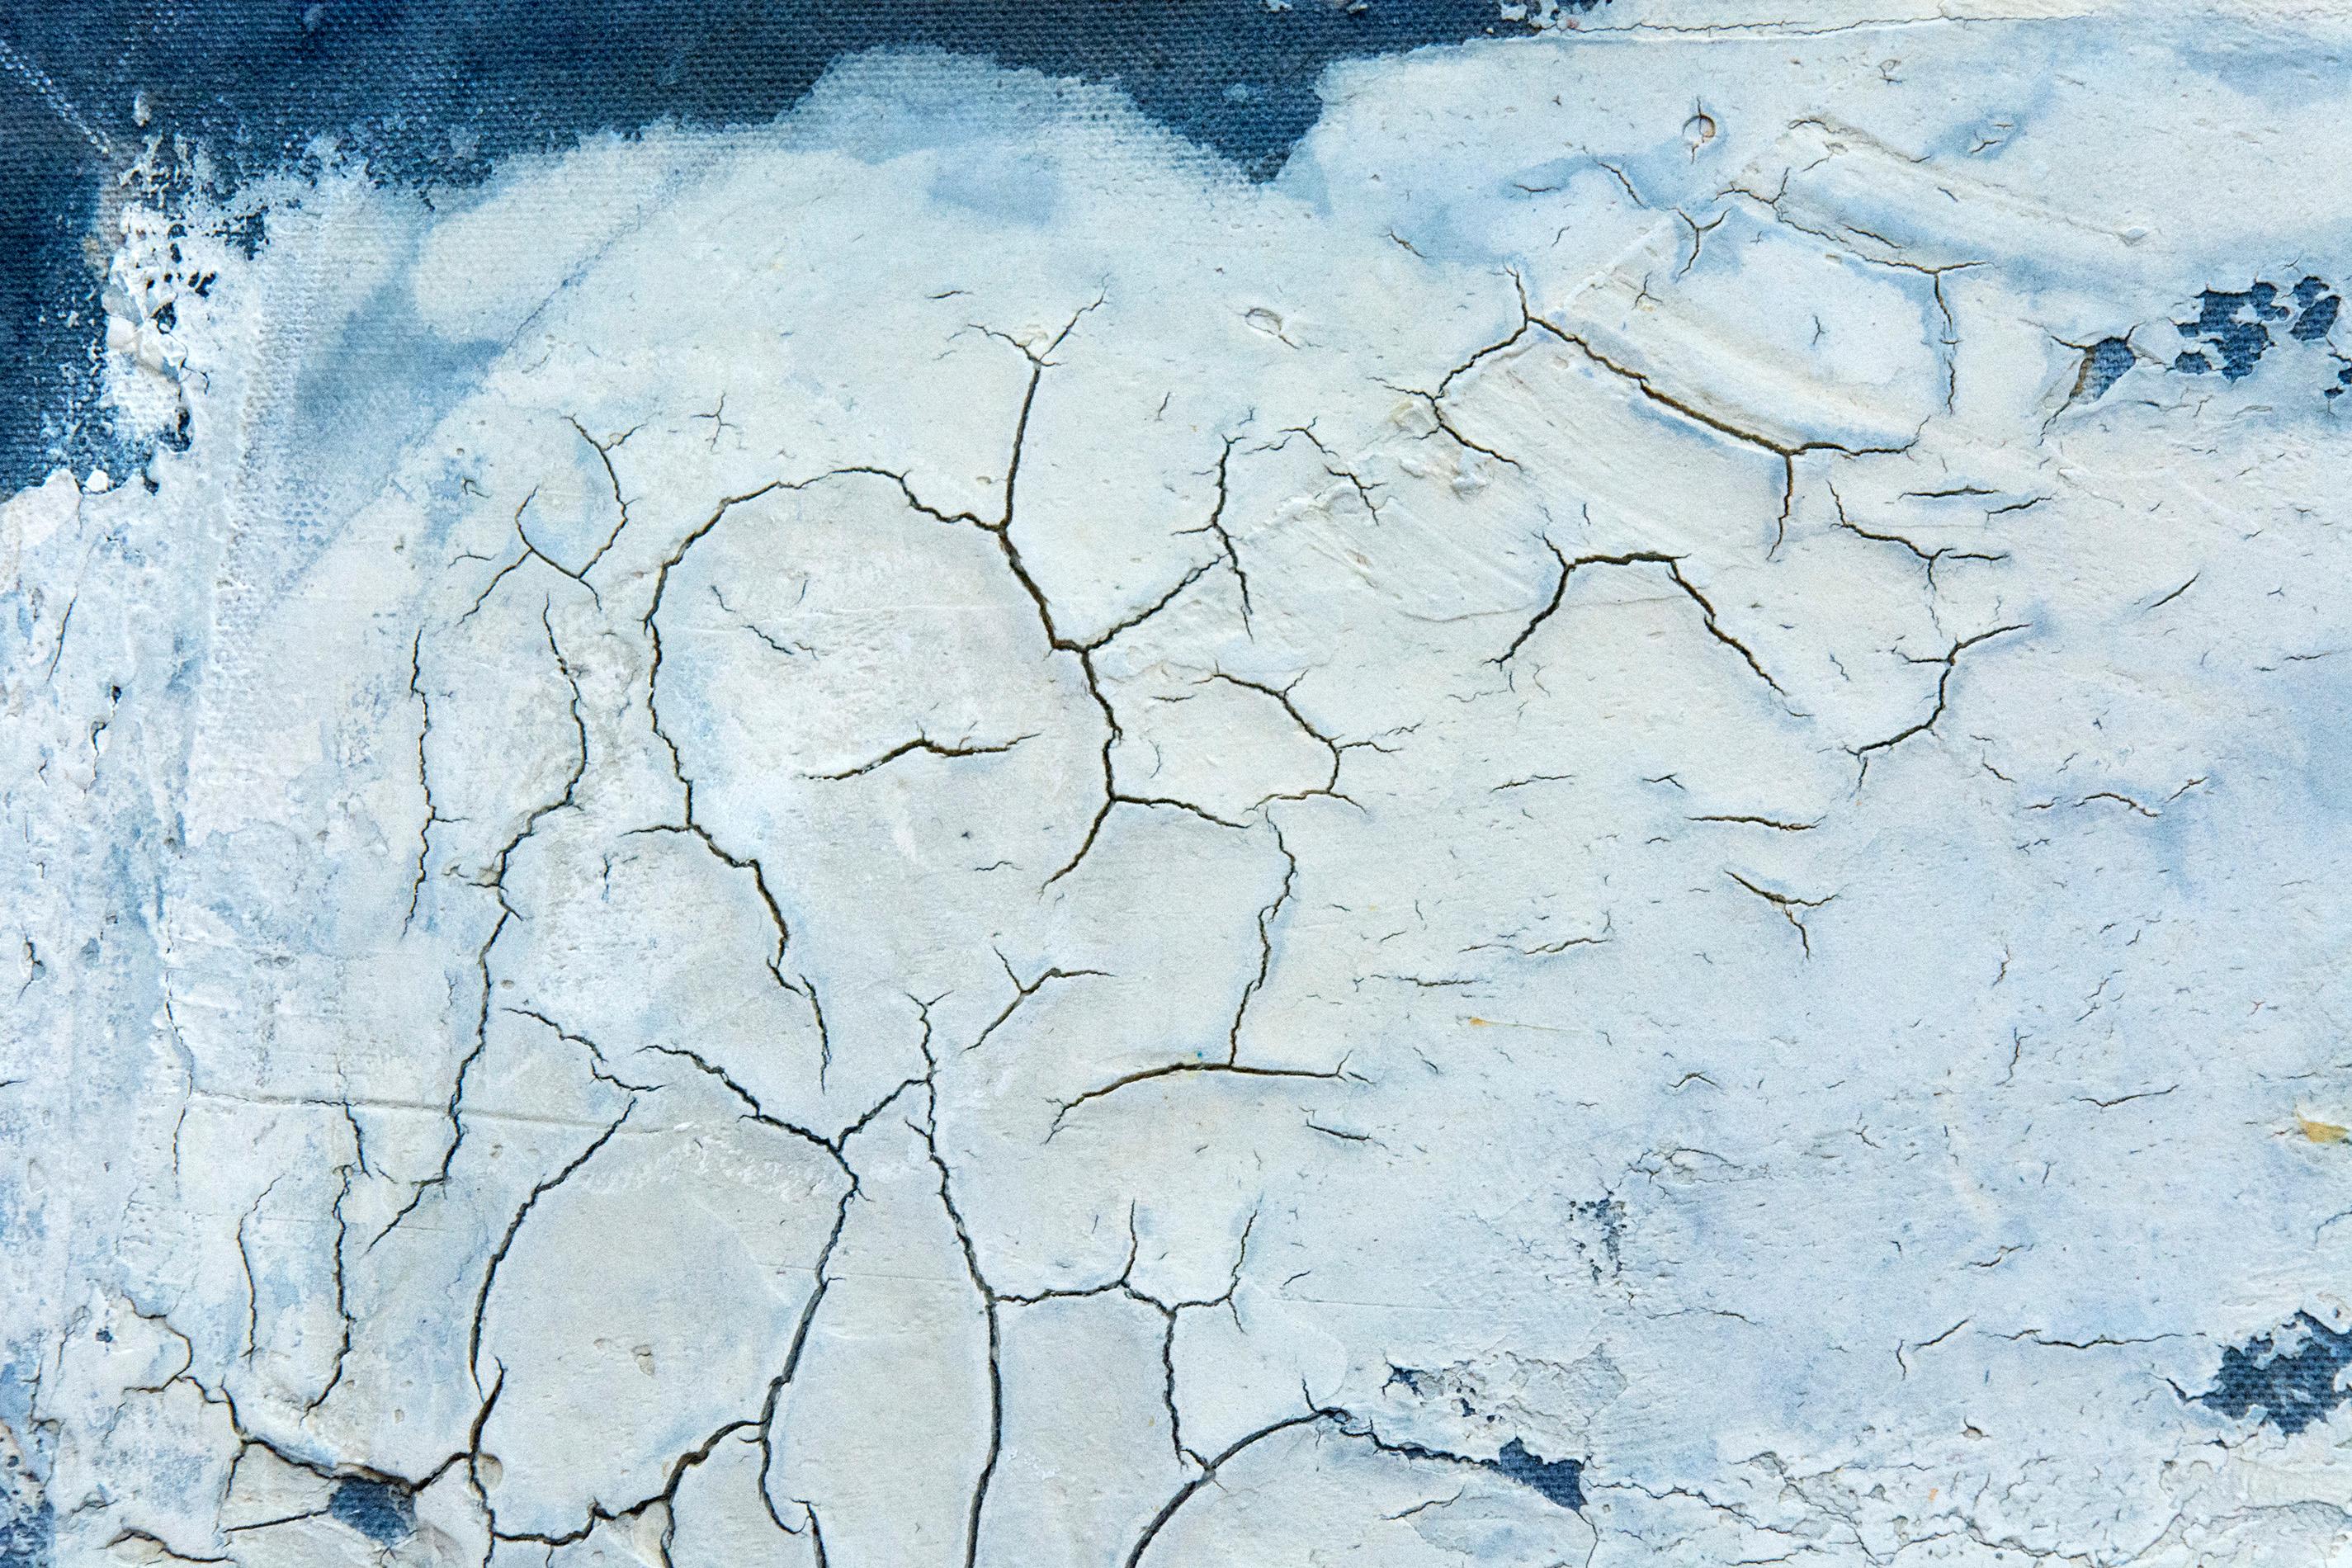 Washes of light blue and cloud white merge in this atmospheric plaster and pigment painting by Jutta Naim. Marks pulled by hand through the plaster, thick and cracking deliberately and dynamically in areas, create a lively and balanced composition.